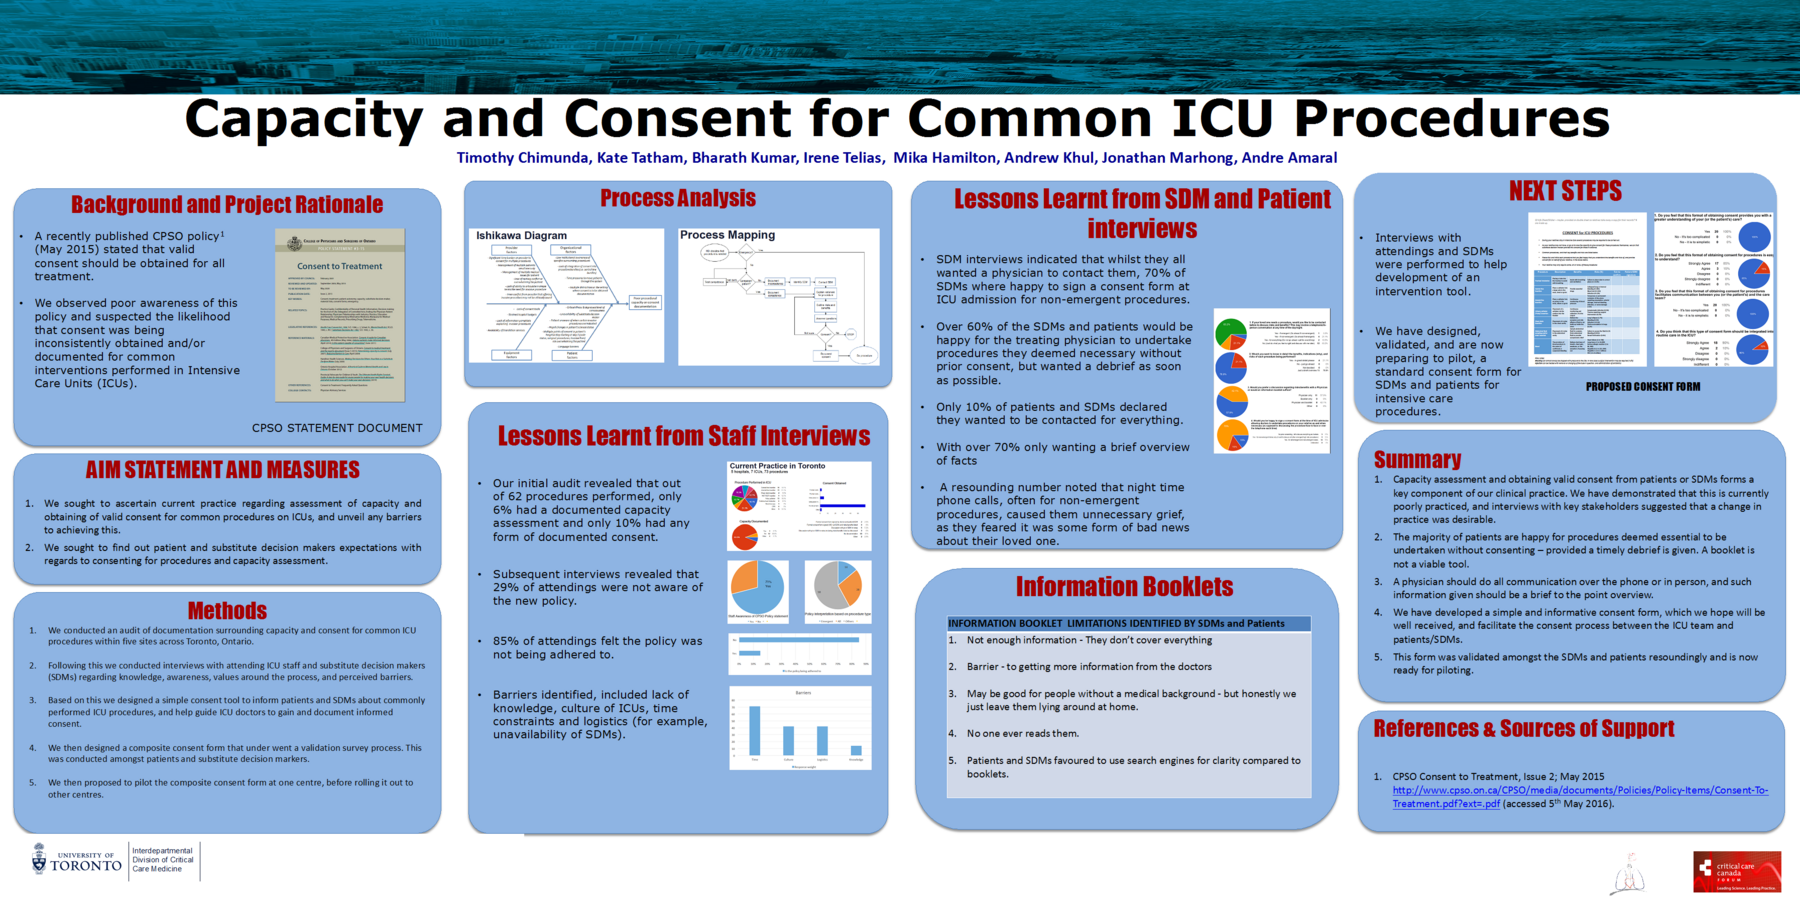 Capacity and consent for common ICU procedures